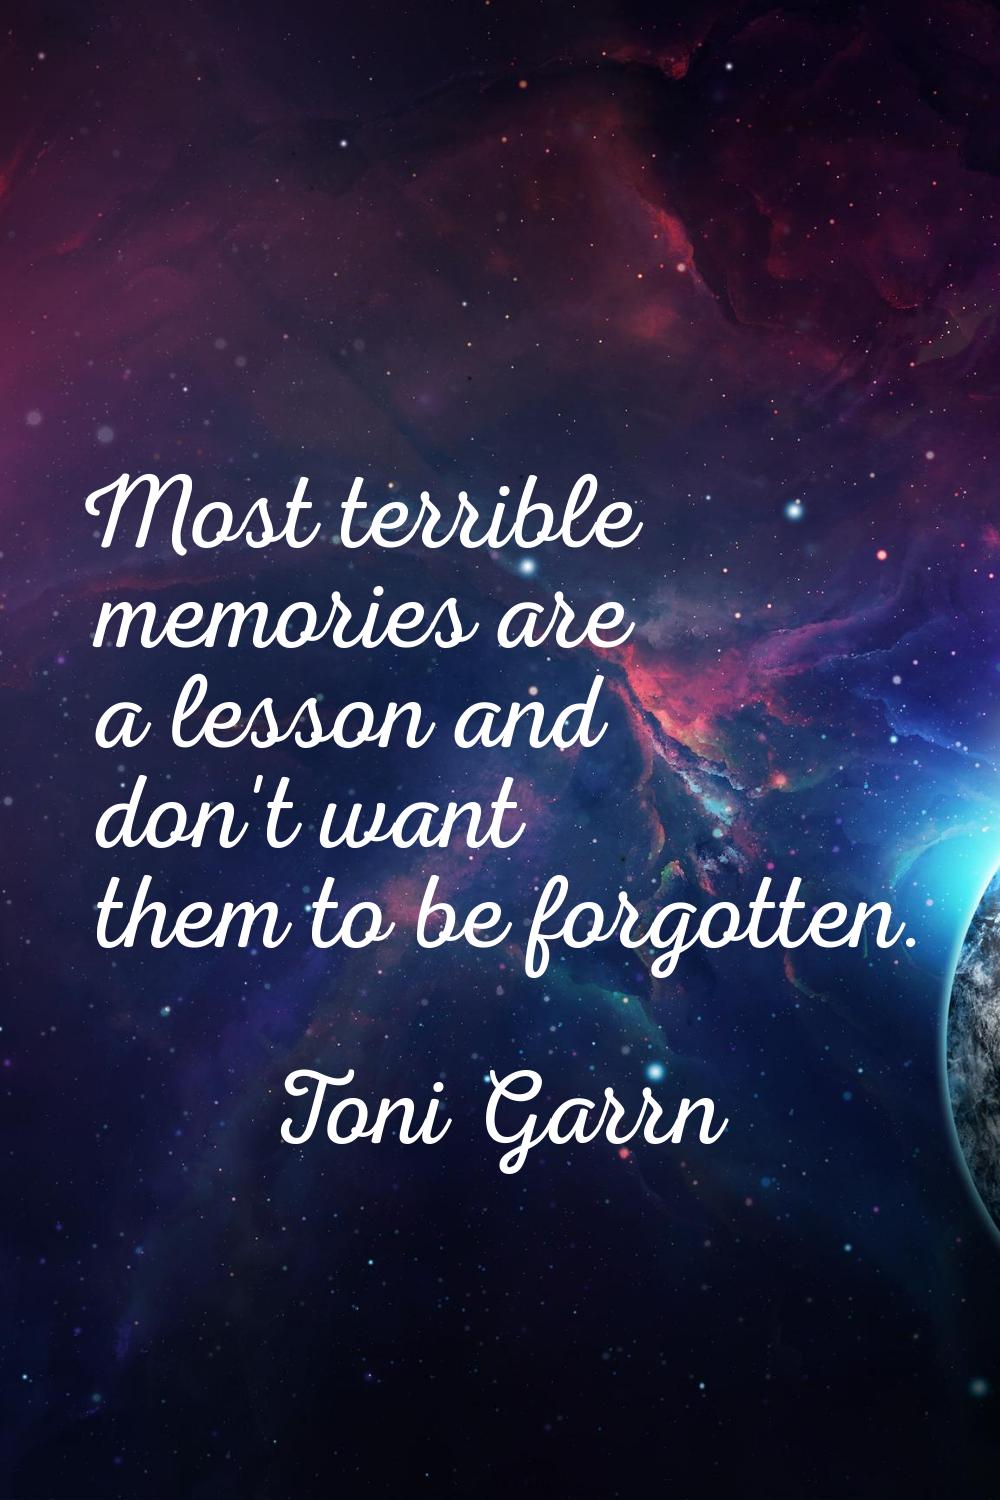 Most terrible memories are a lesson and don't want them to be forgotten.